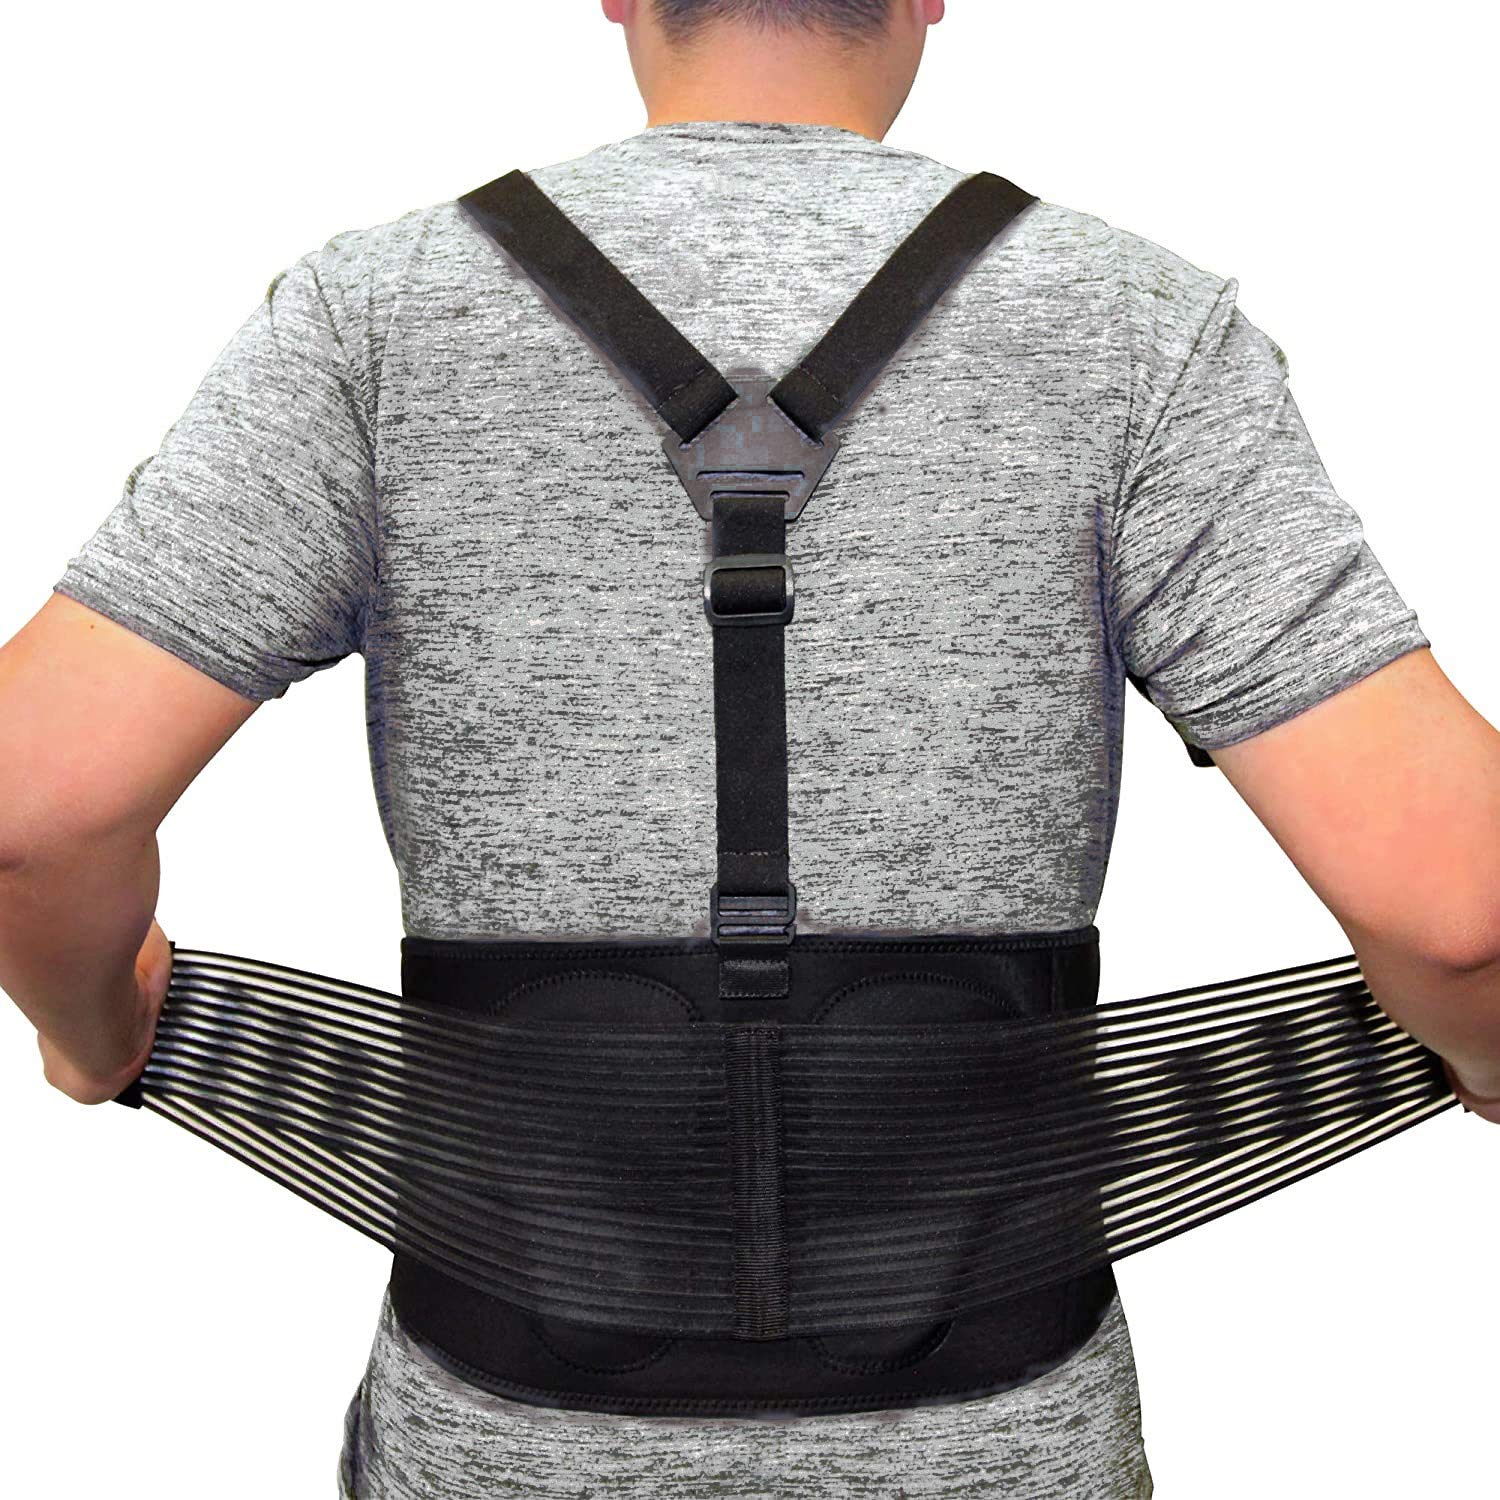 Generic AllyFlex Sports&#194;® Back Brace For Lifting Lower Back Support For Work Y-shape Suspenders Safety Belt With Dual